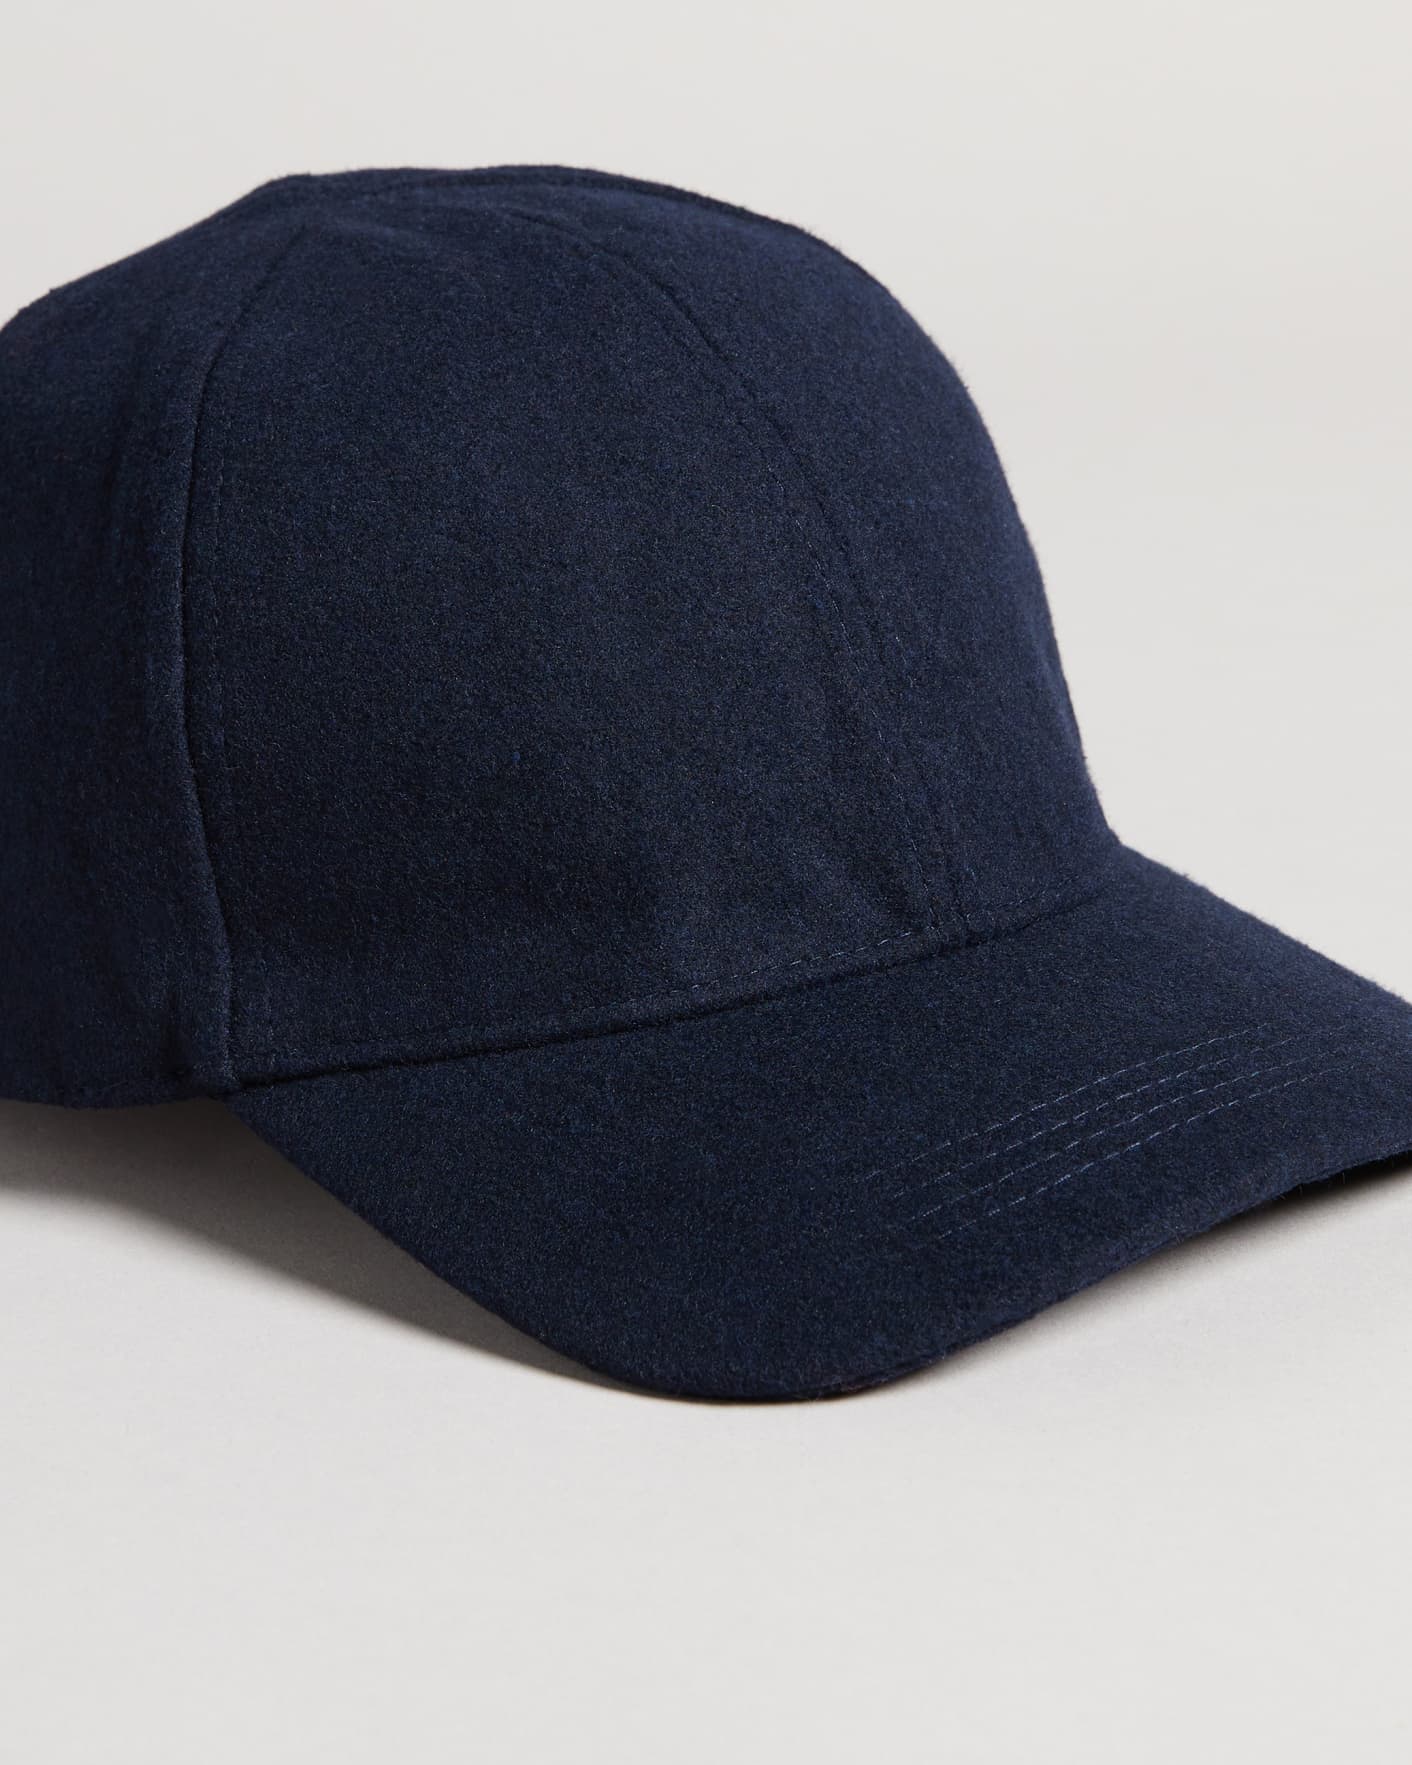 Mens Accessories Hats for Men Ted Baker Wool Baseball Cap in Navy Blue 